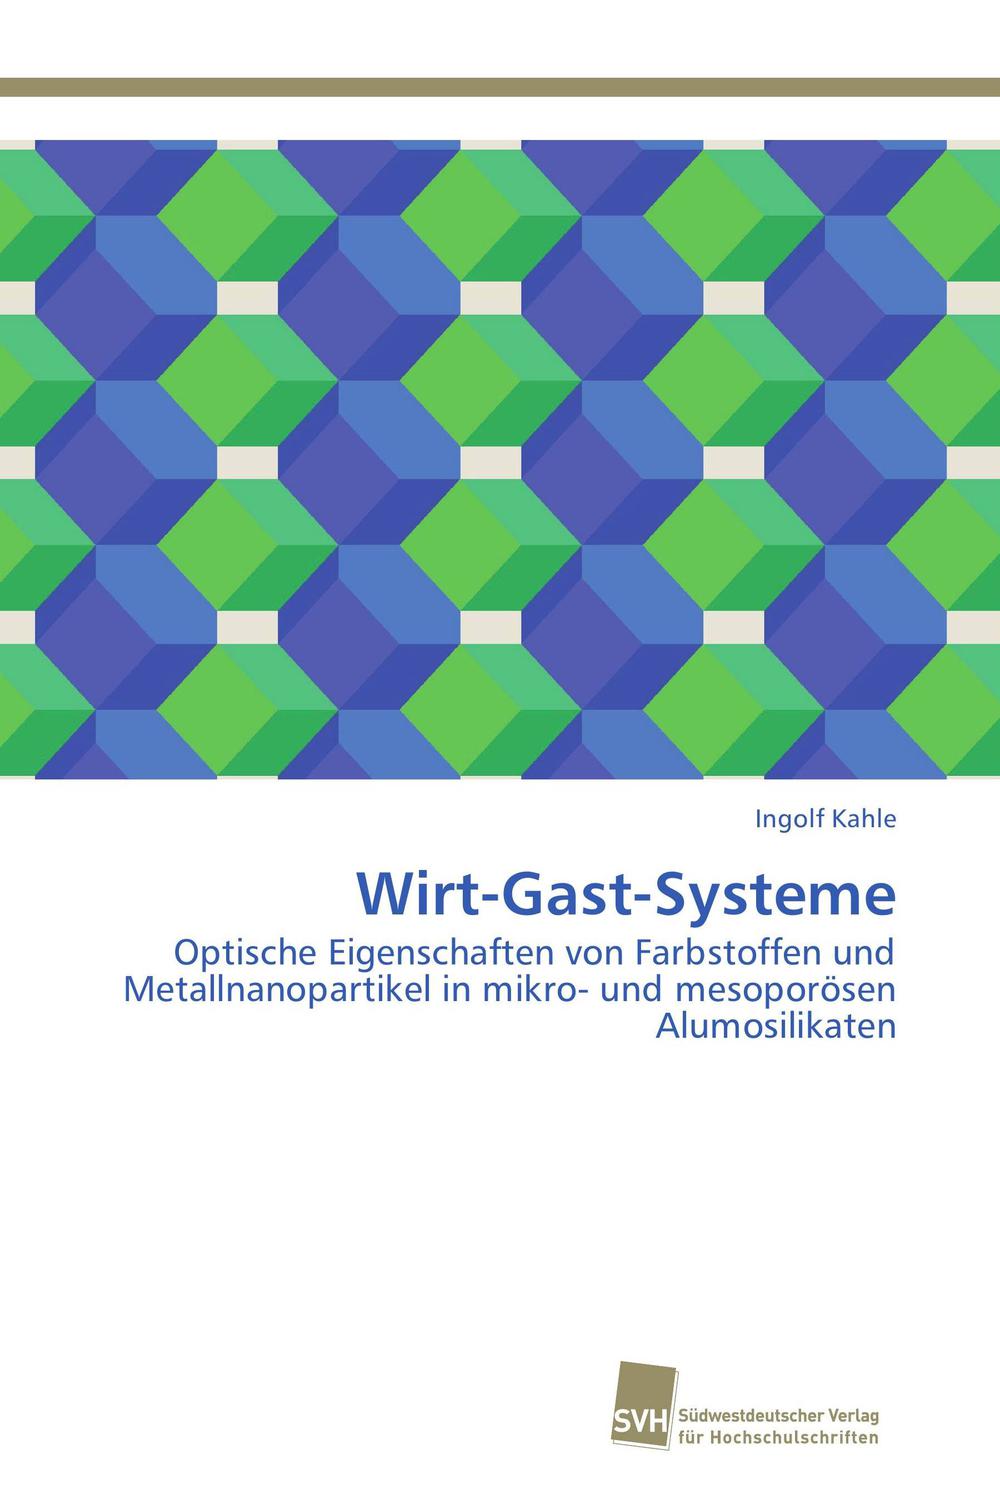 Wirt-Gast-Systeme Ingolf Kahle Author